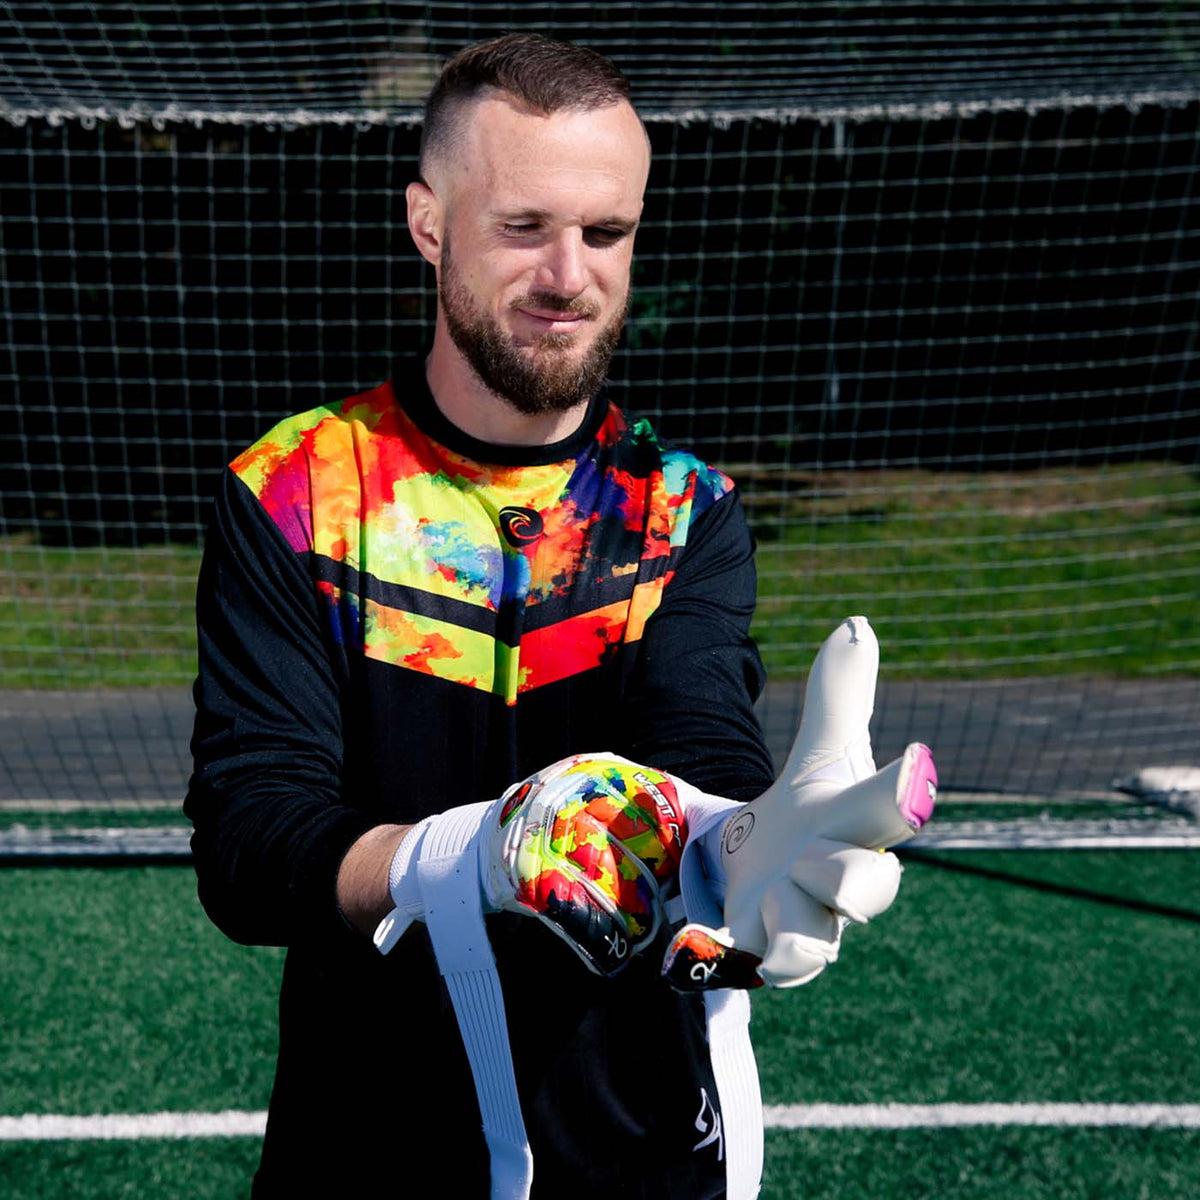 S24F Limited Edition Jersey - West Coast Goalkeeping